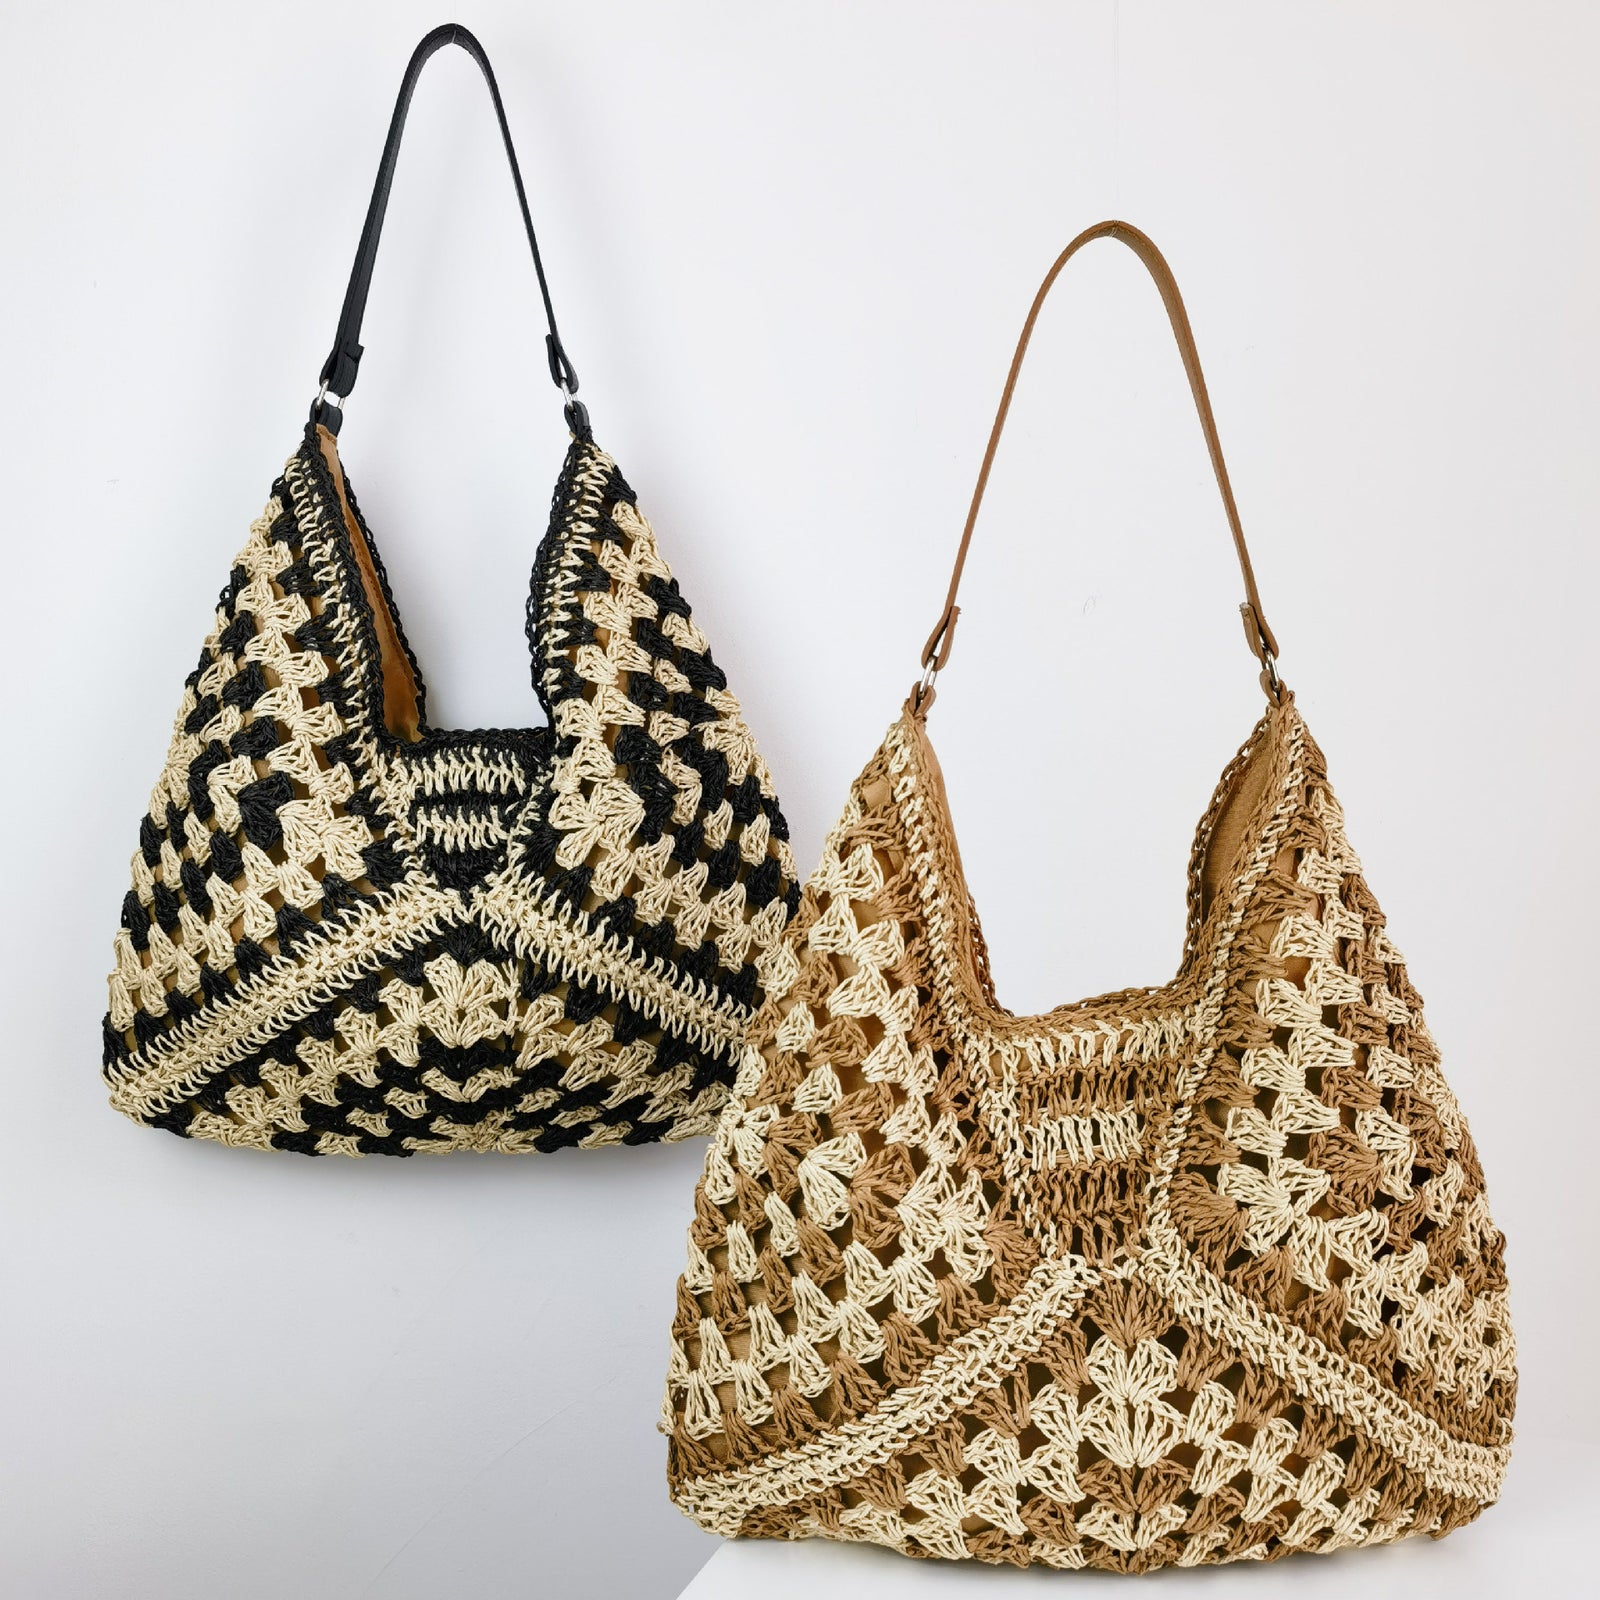 Young Girls Fashion Handmade Straw Woven Hollow Contrast Color Weave Shoulder Bag